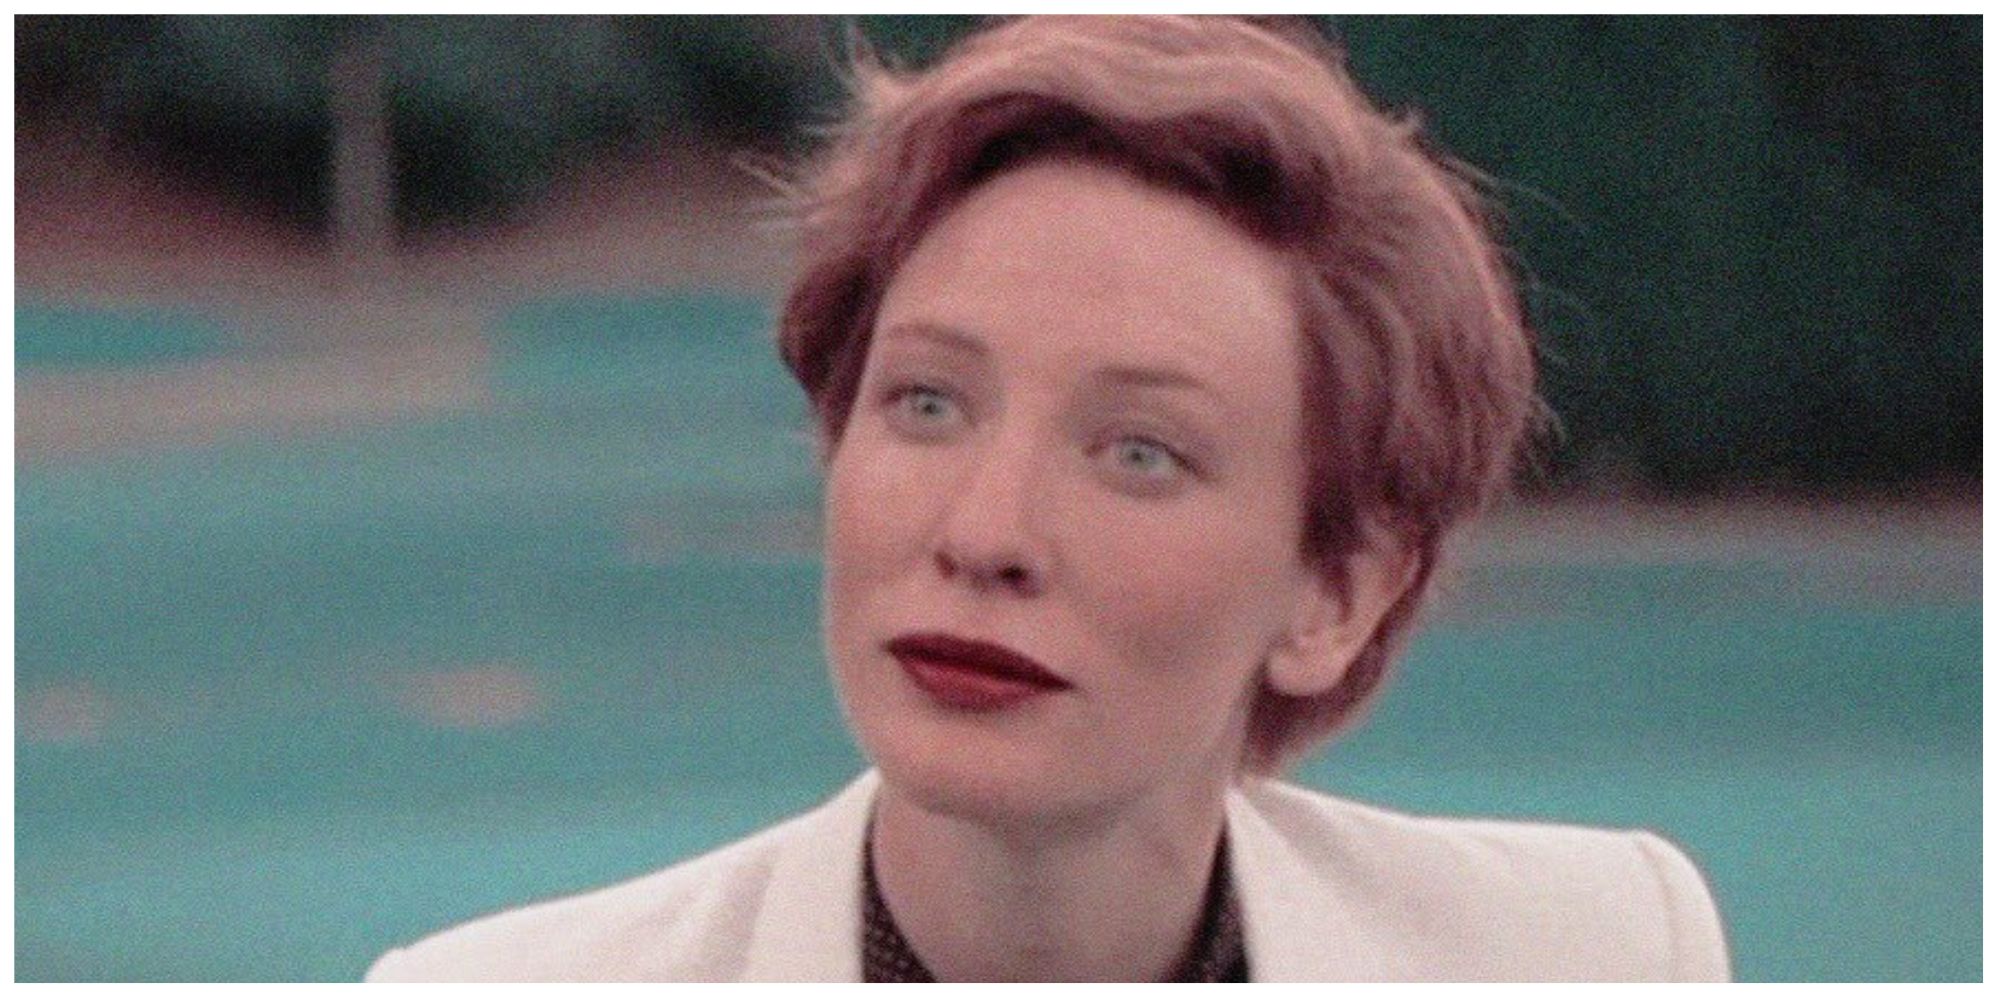 Cate Blanchett as Katherine Hepburn in The Aviator stood on a golf course